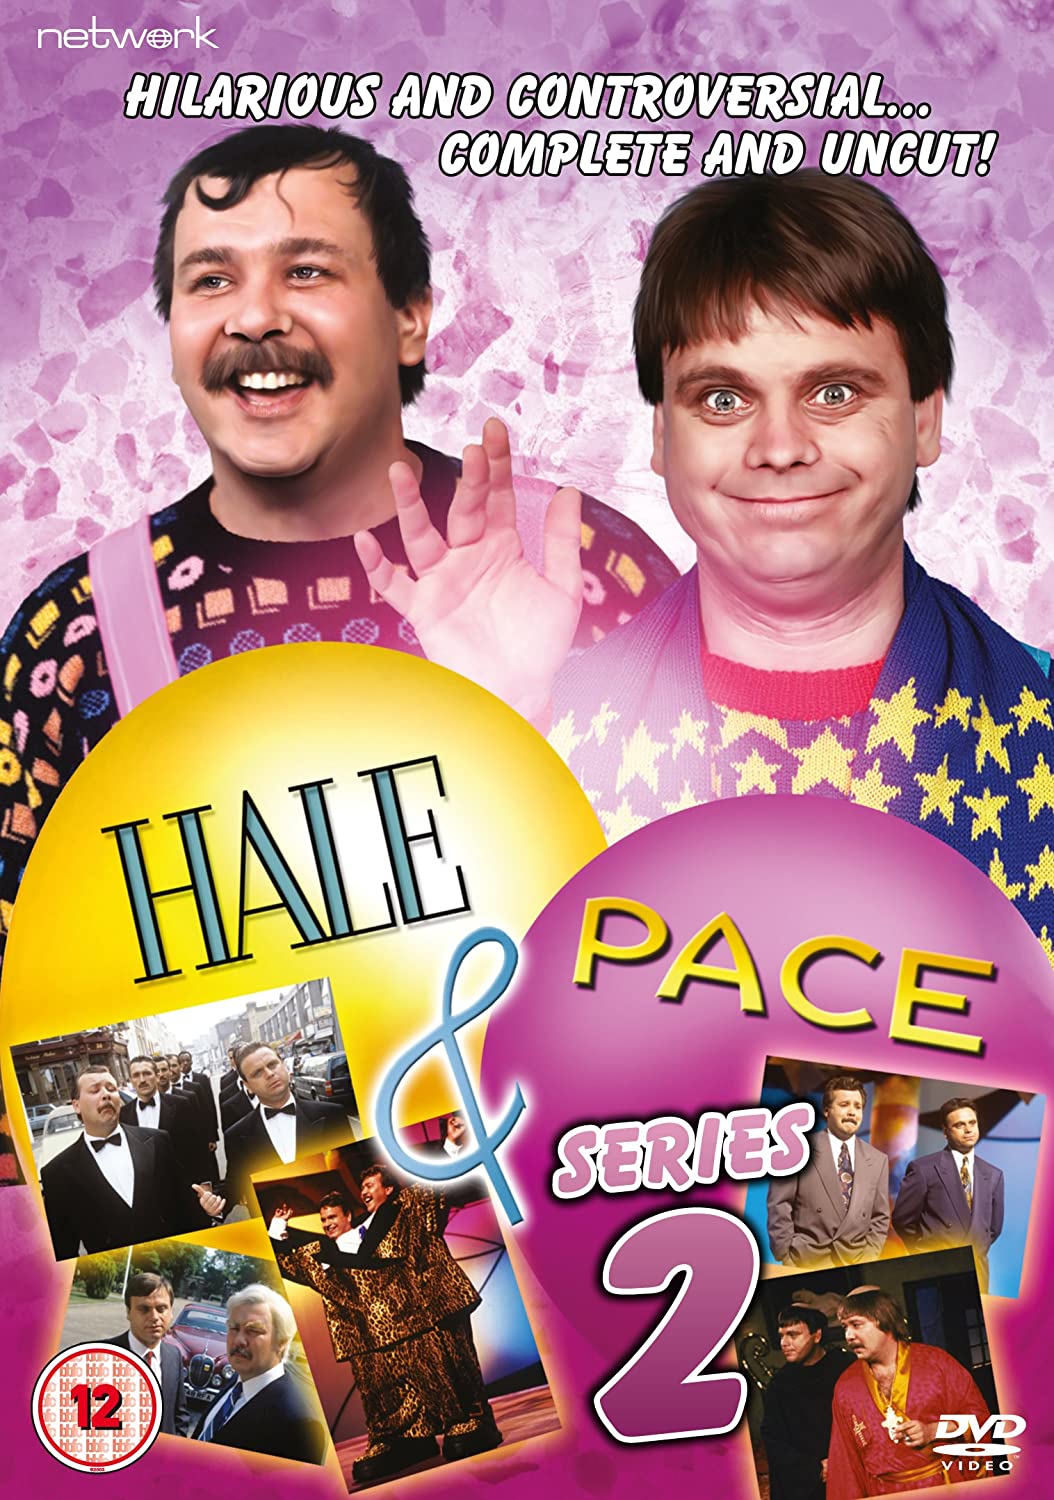 Hale and Pace - The Complete Series 2 - Comedy [DVD]